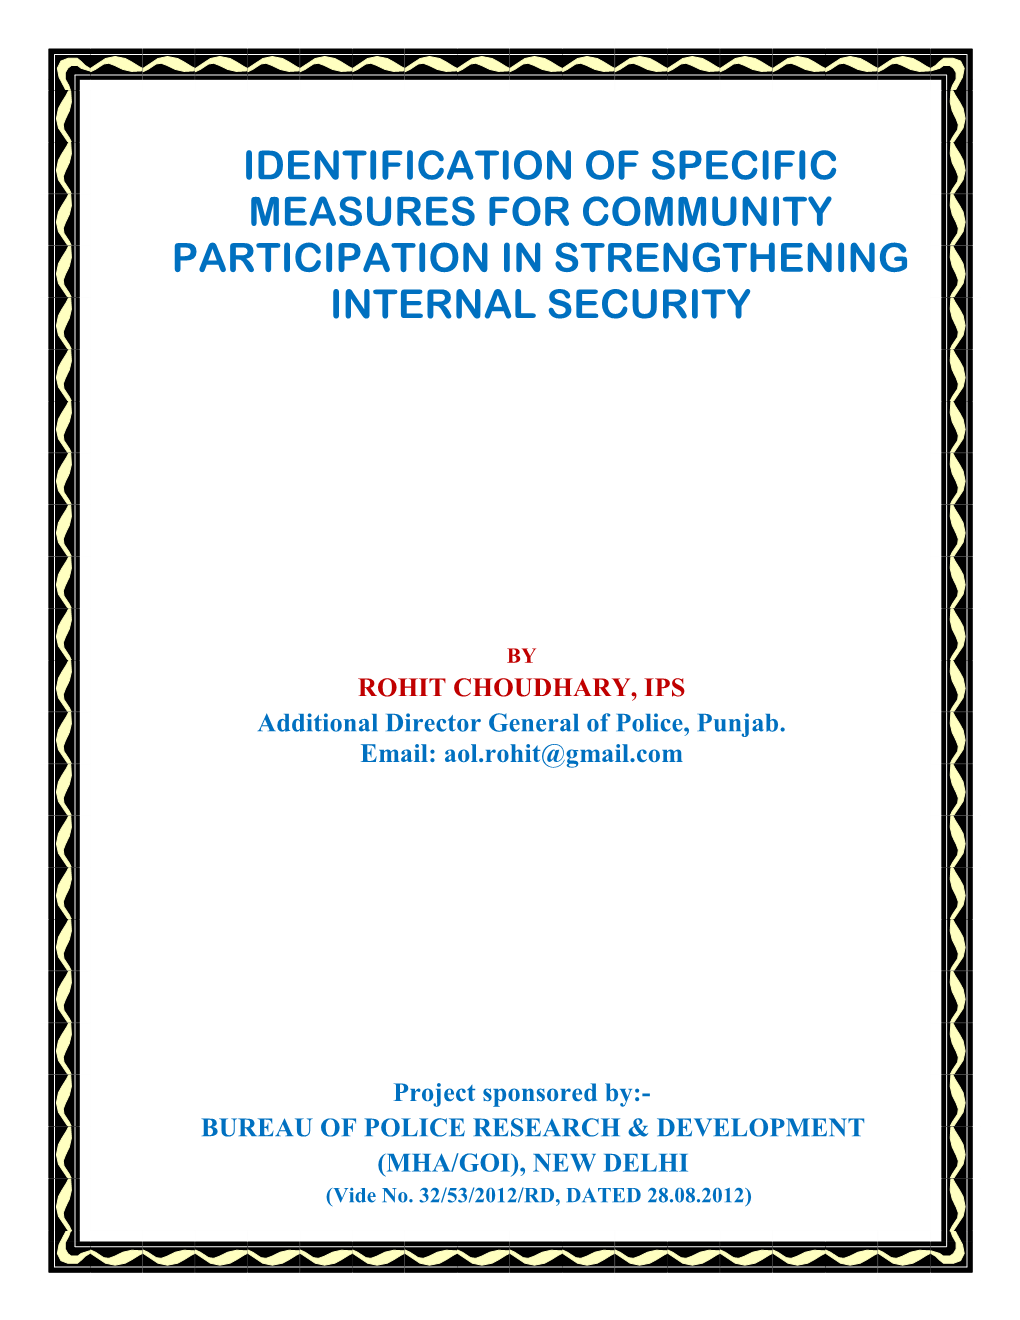 Identification of Specific Measures for Community Participation in Strengthening Internal Security